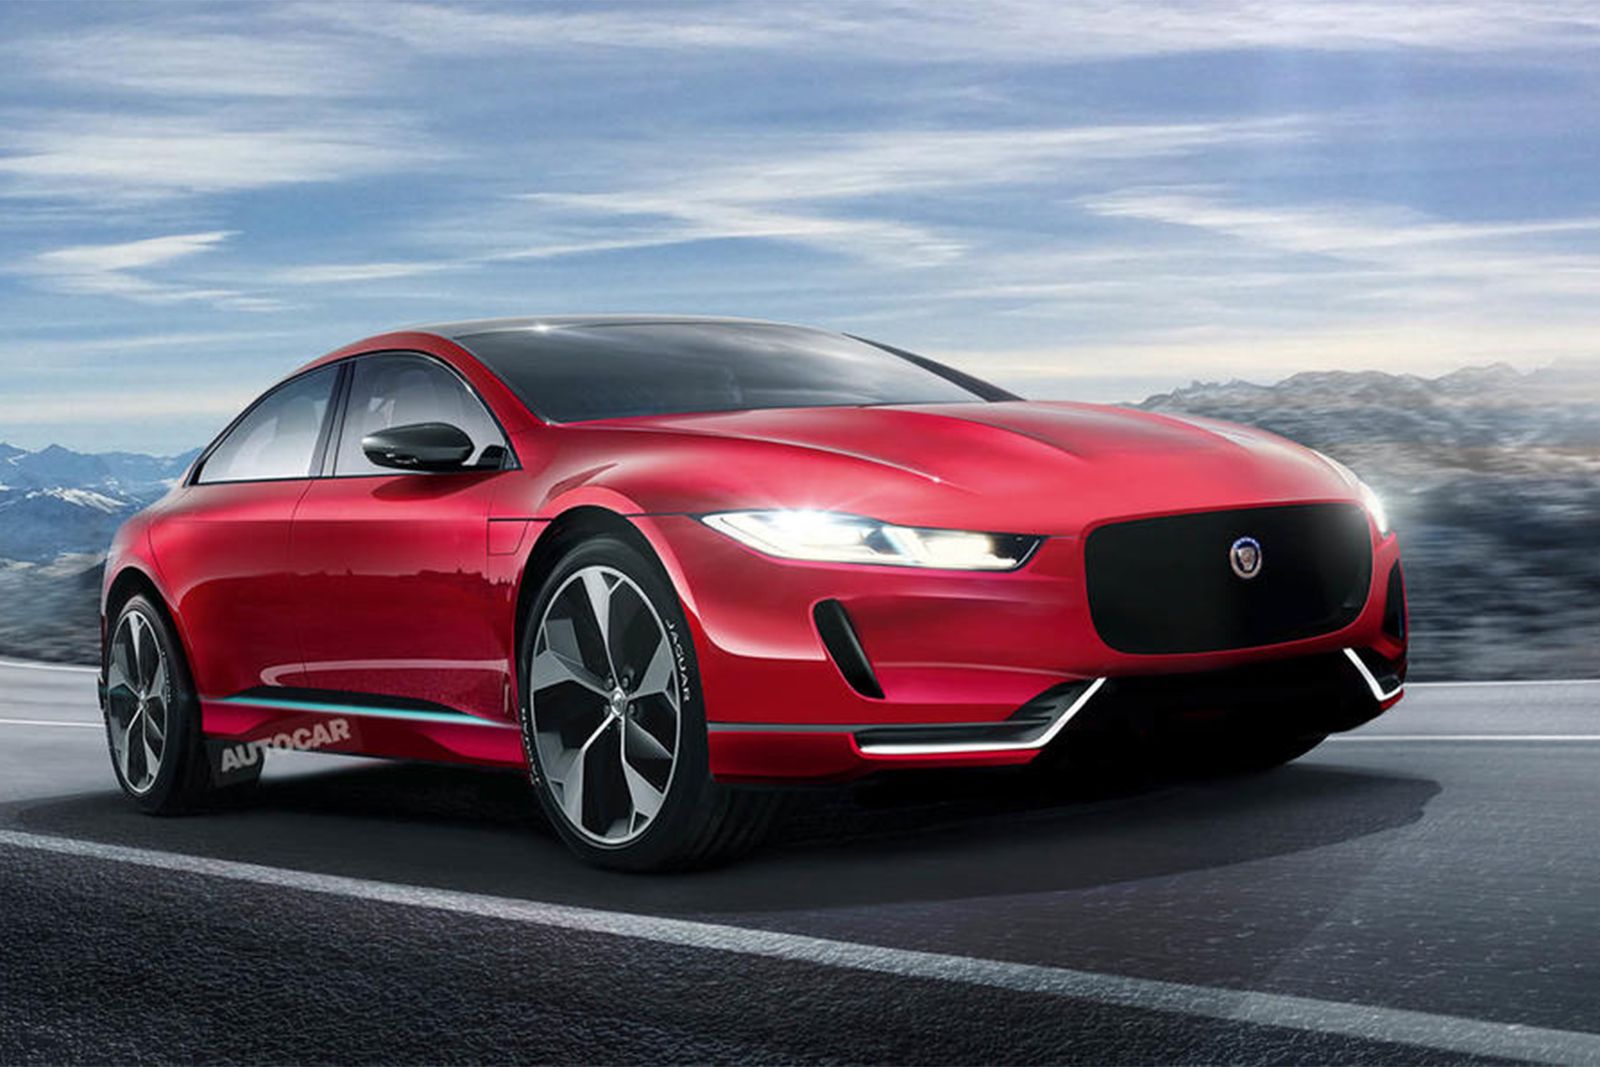 Jaguars flagship XJ saloon to be reborn as an electric model in 2019 image 1